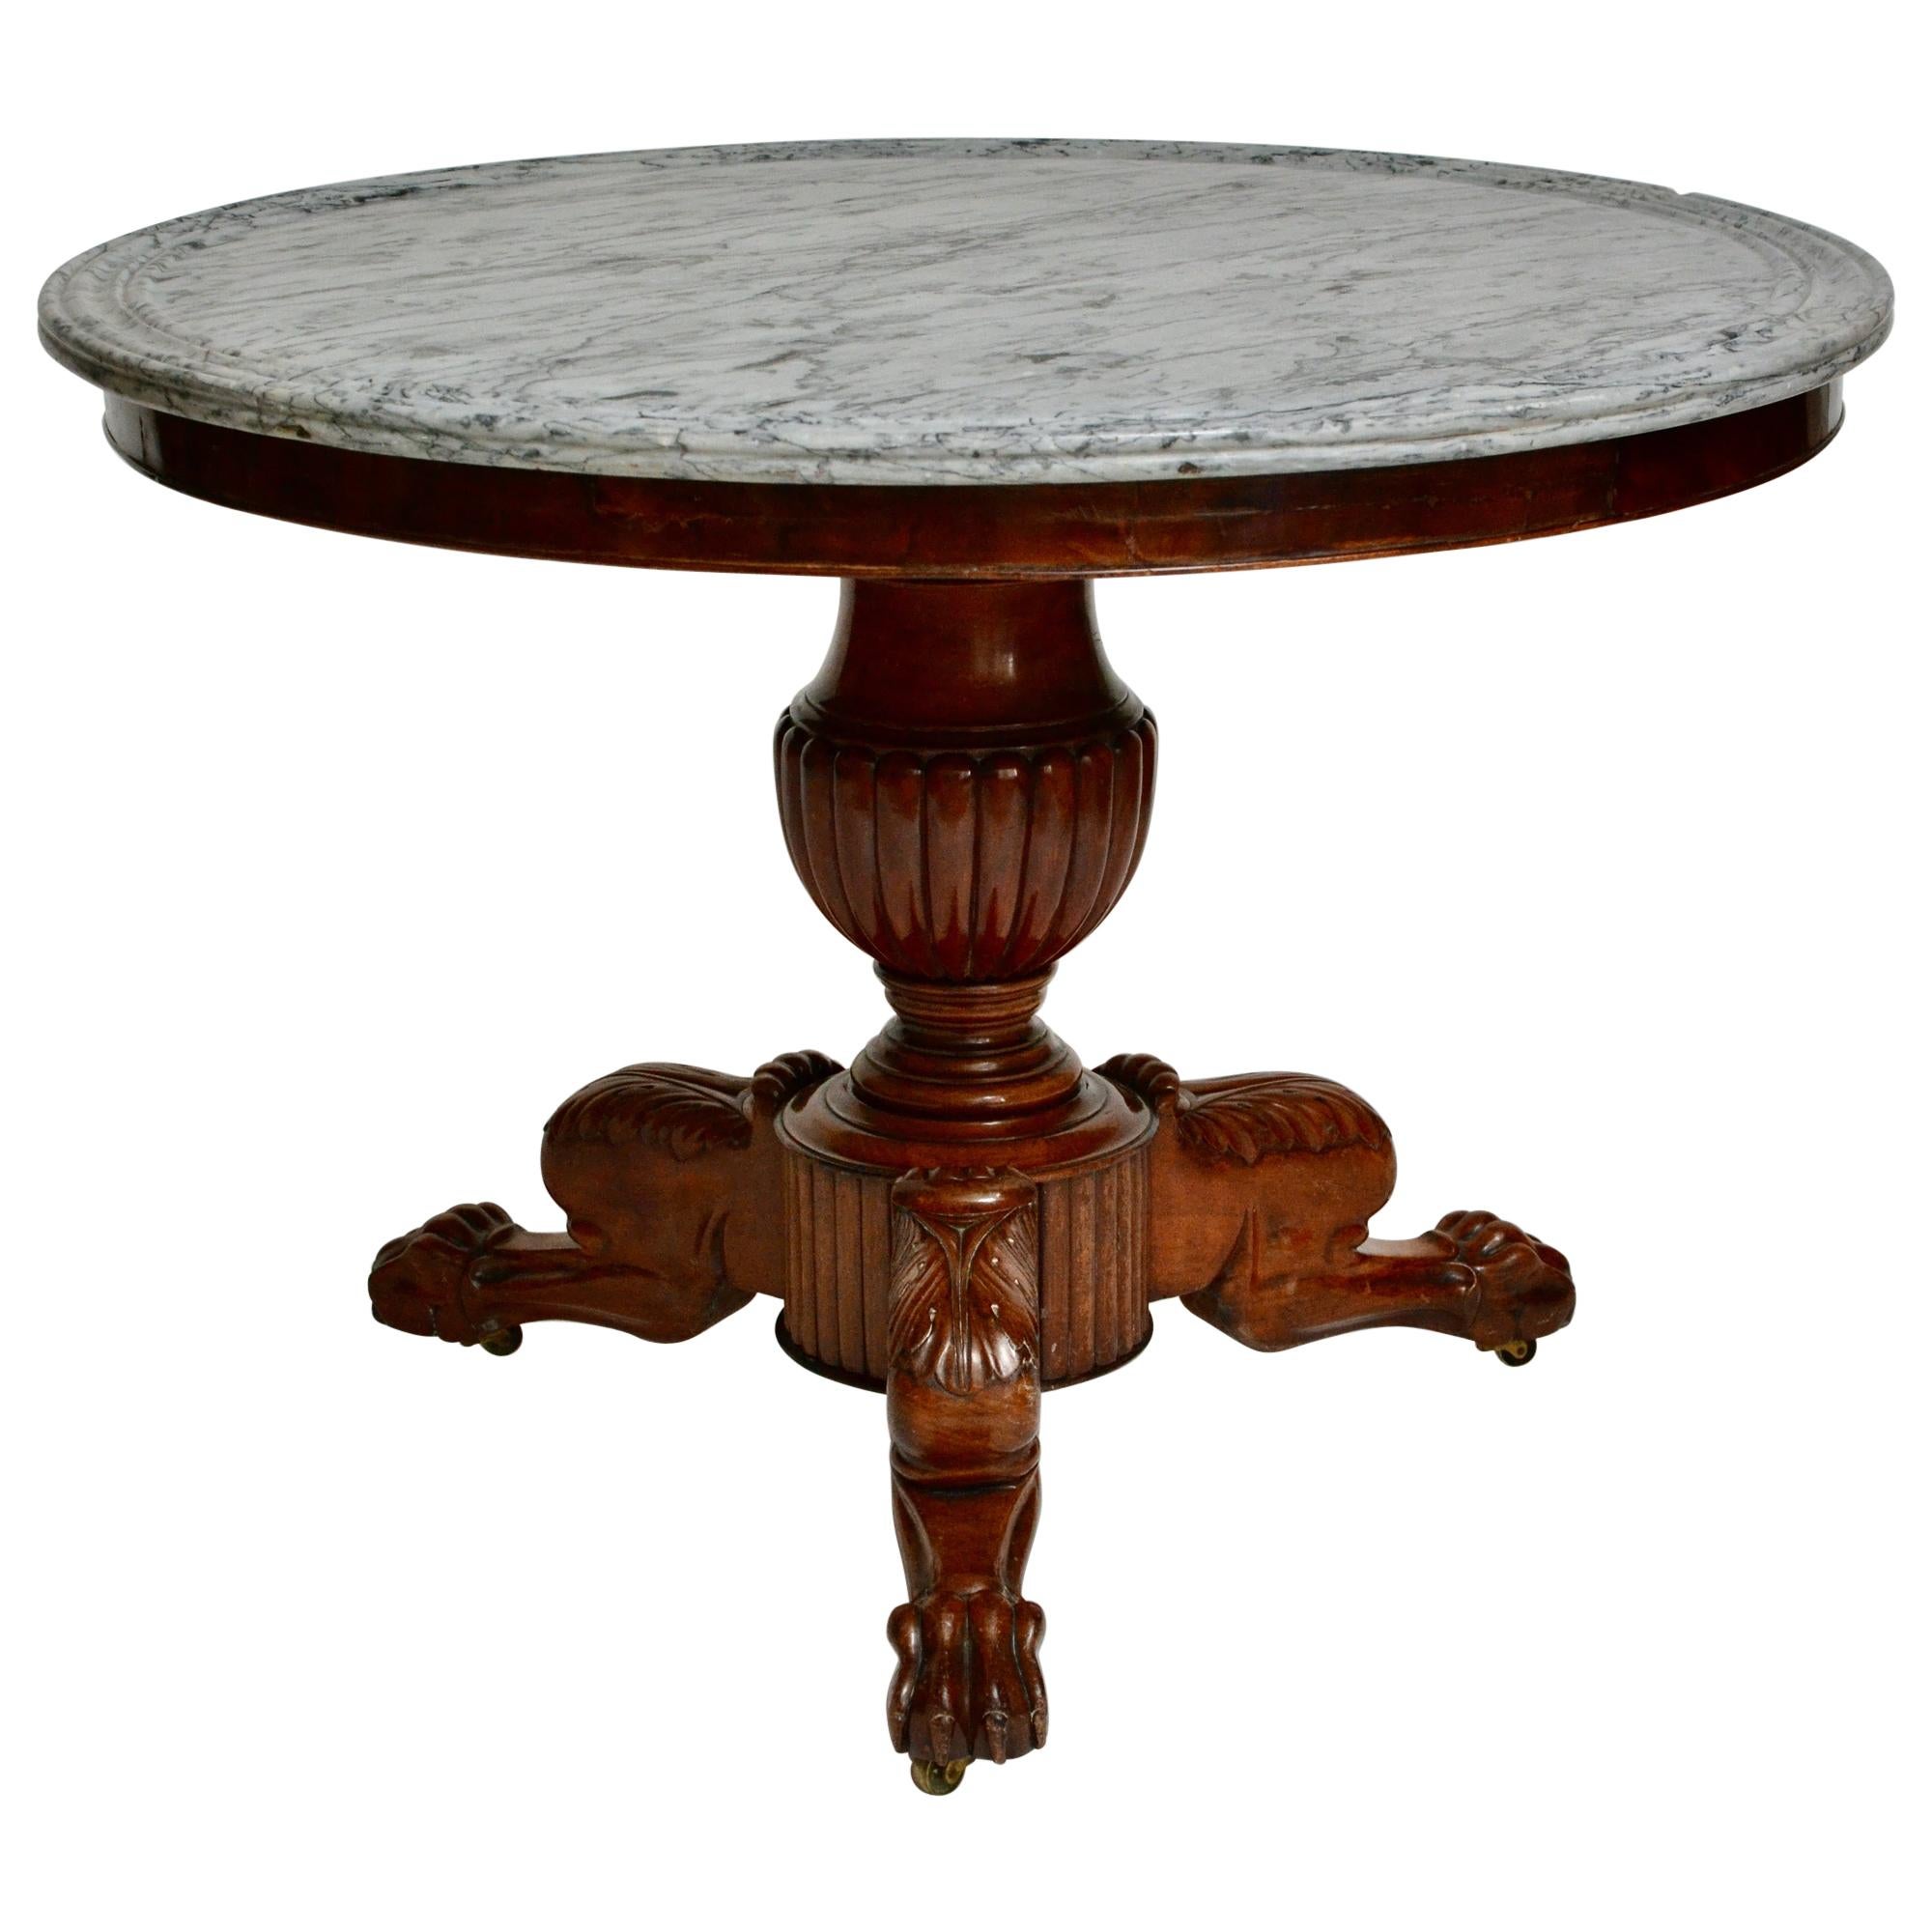 French Empire Mahogany Gueridon Table with a Grey Marble Top